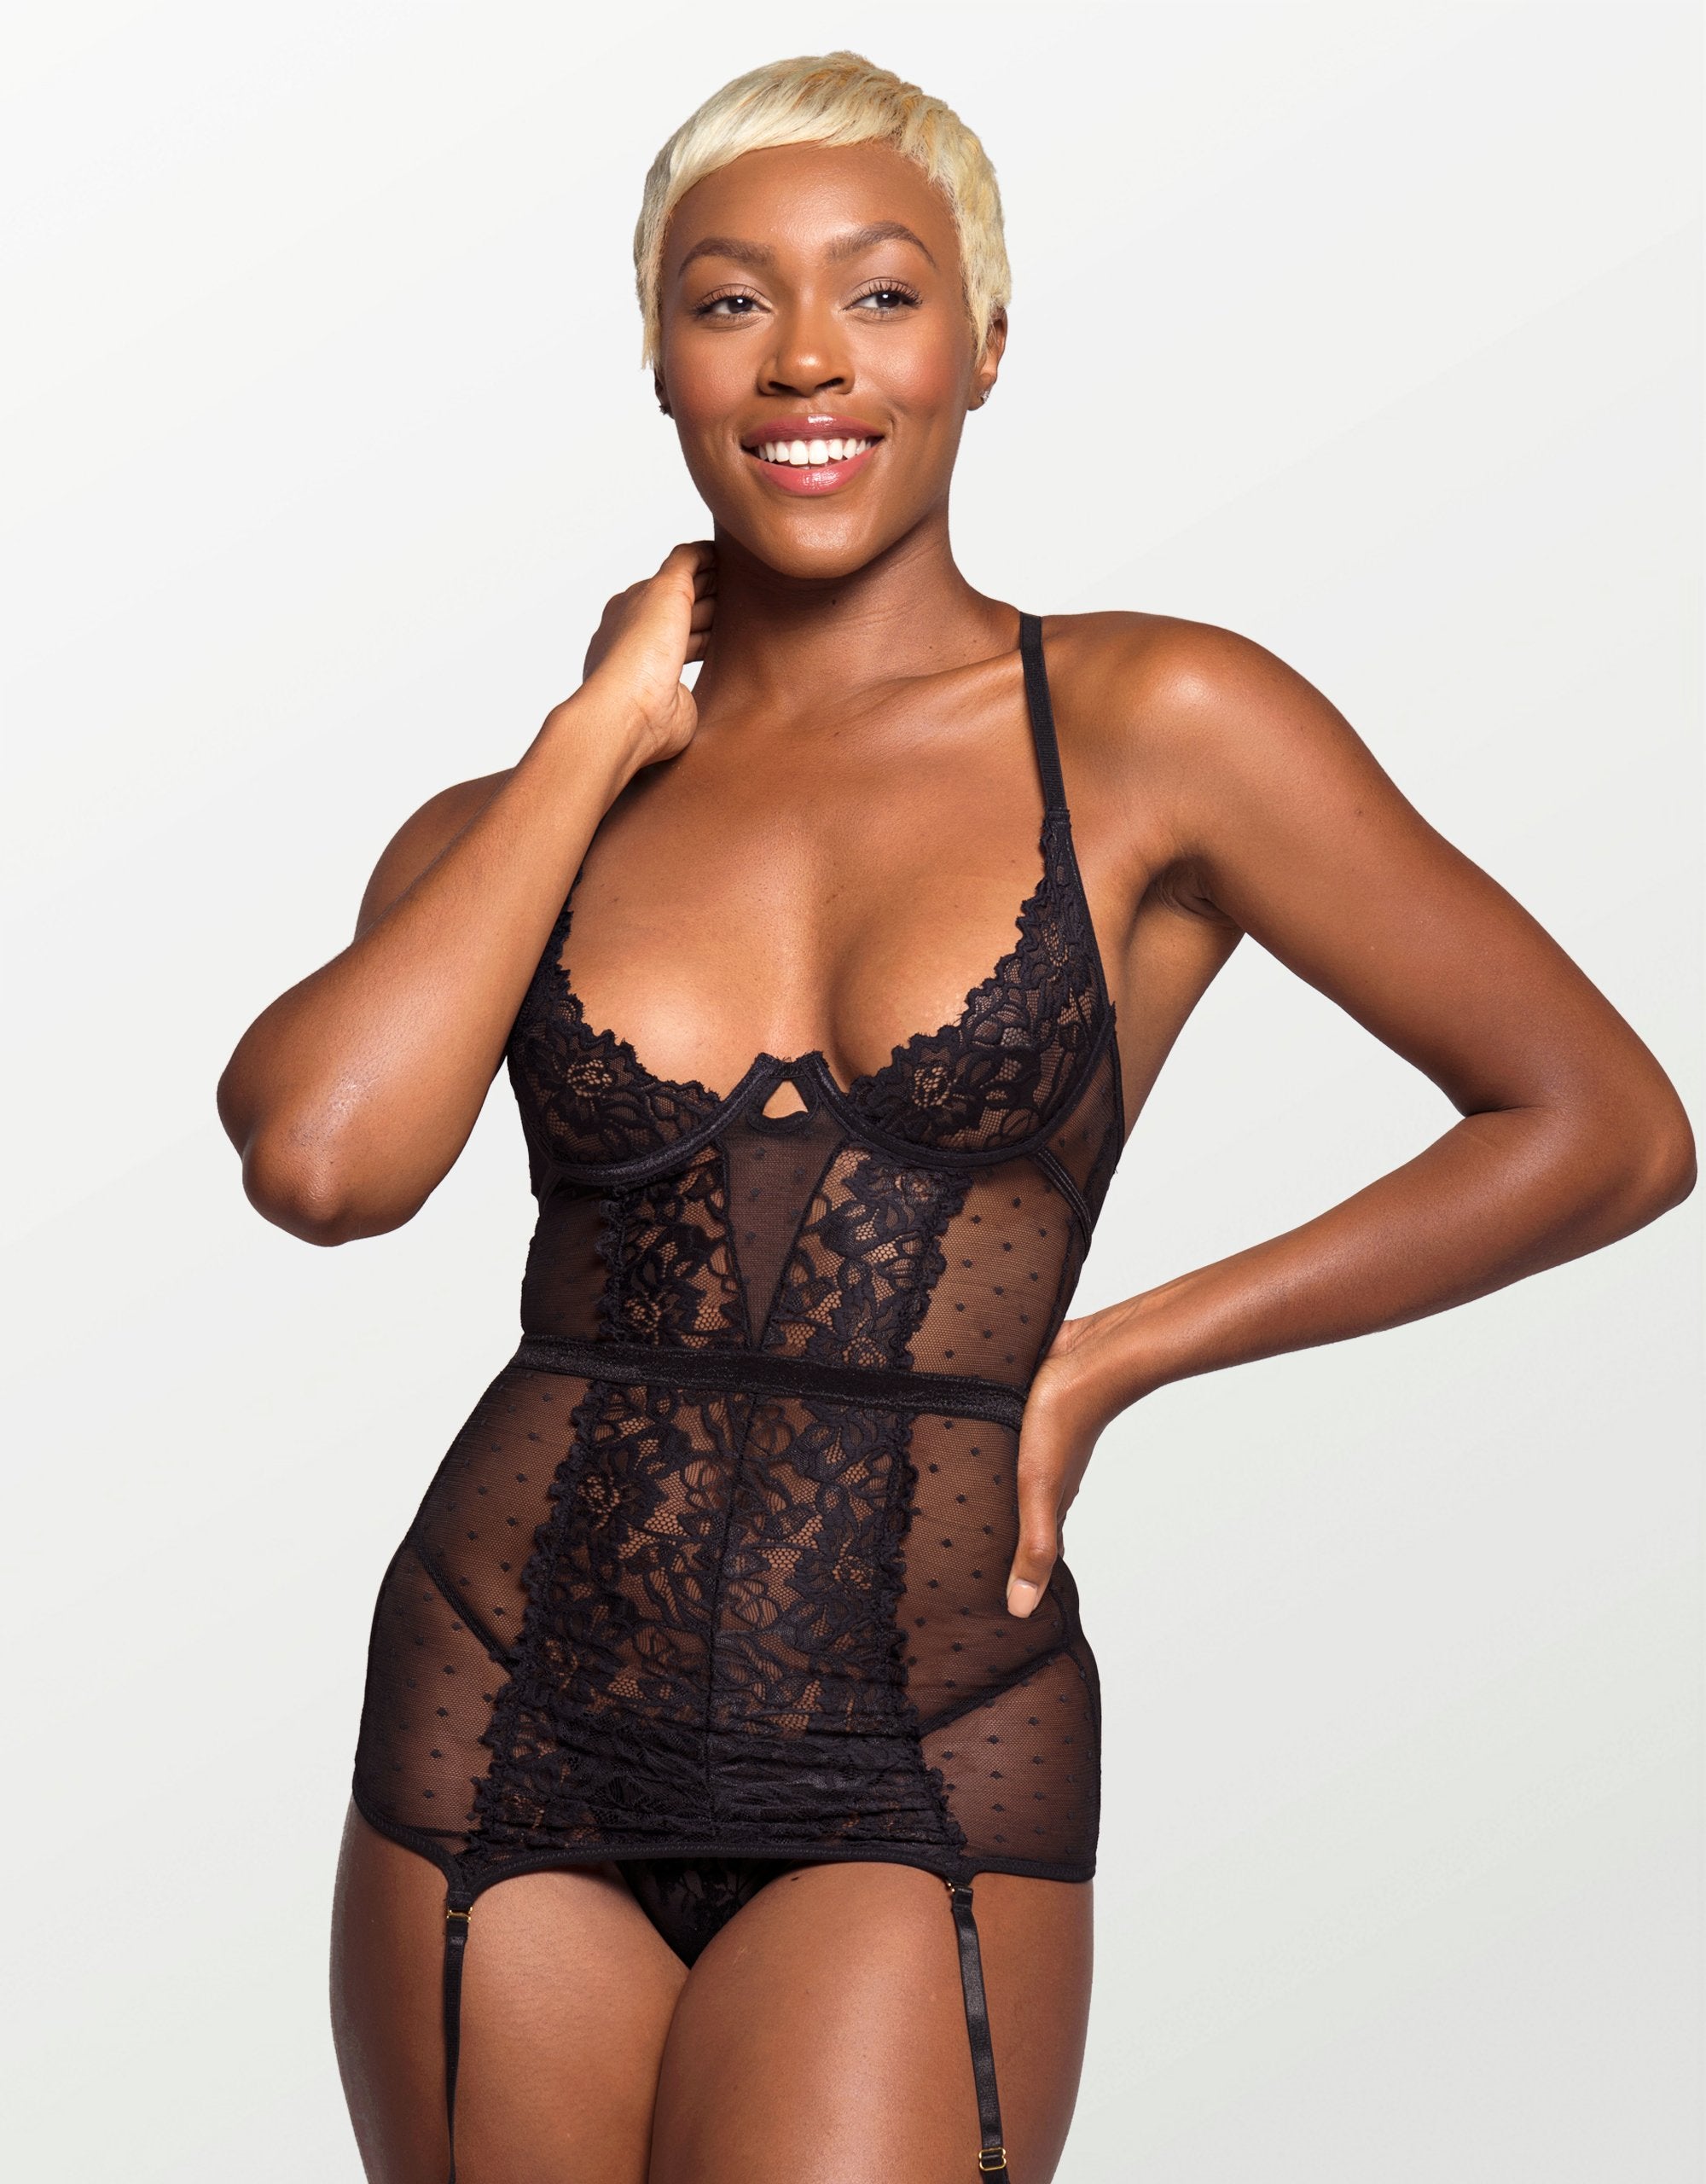 model wearing the set in black, including a chemise with underwires and garter straps